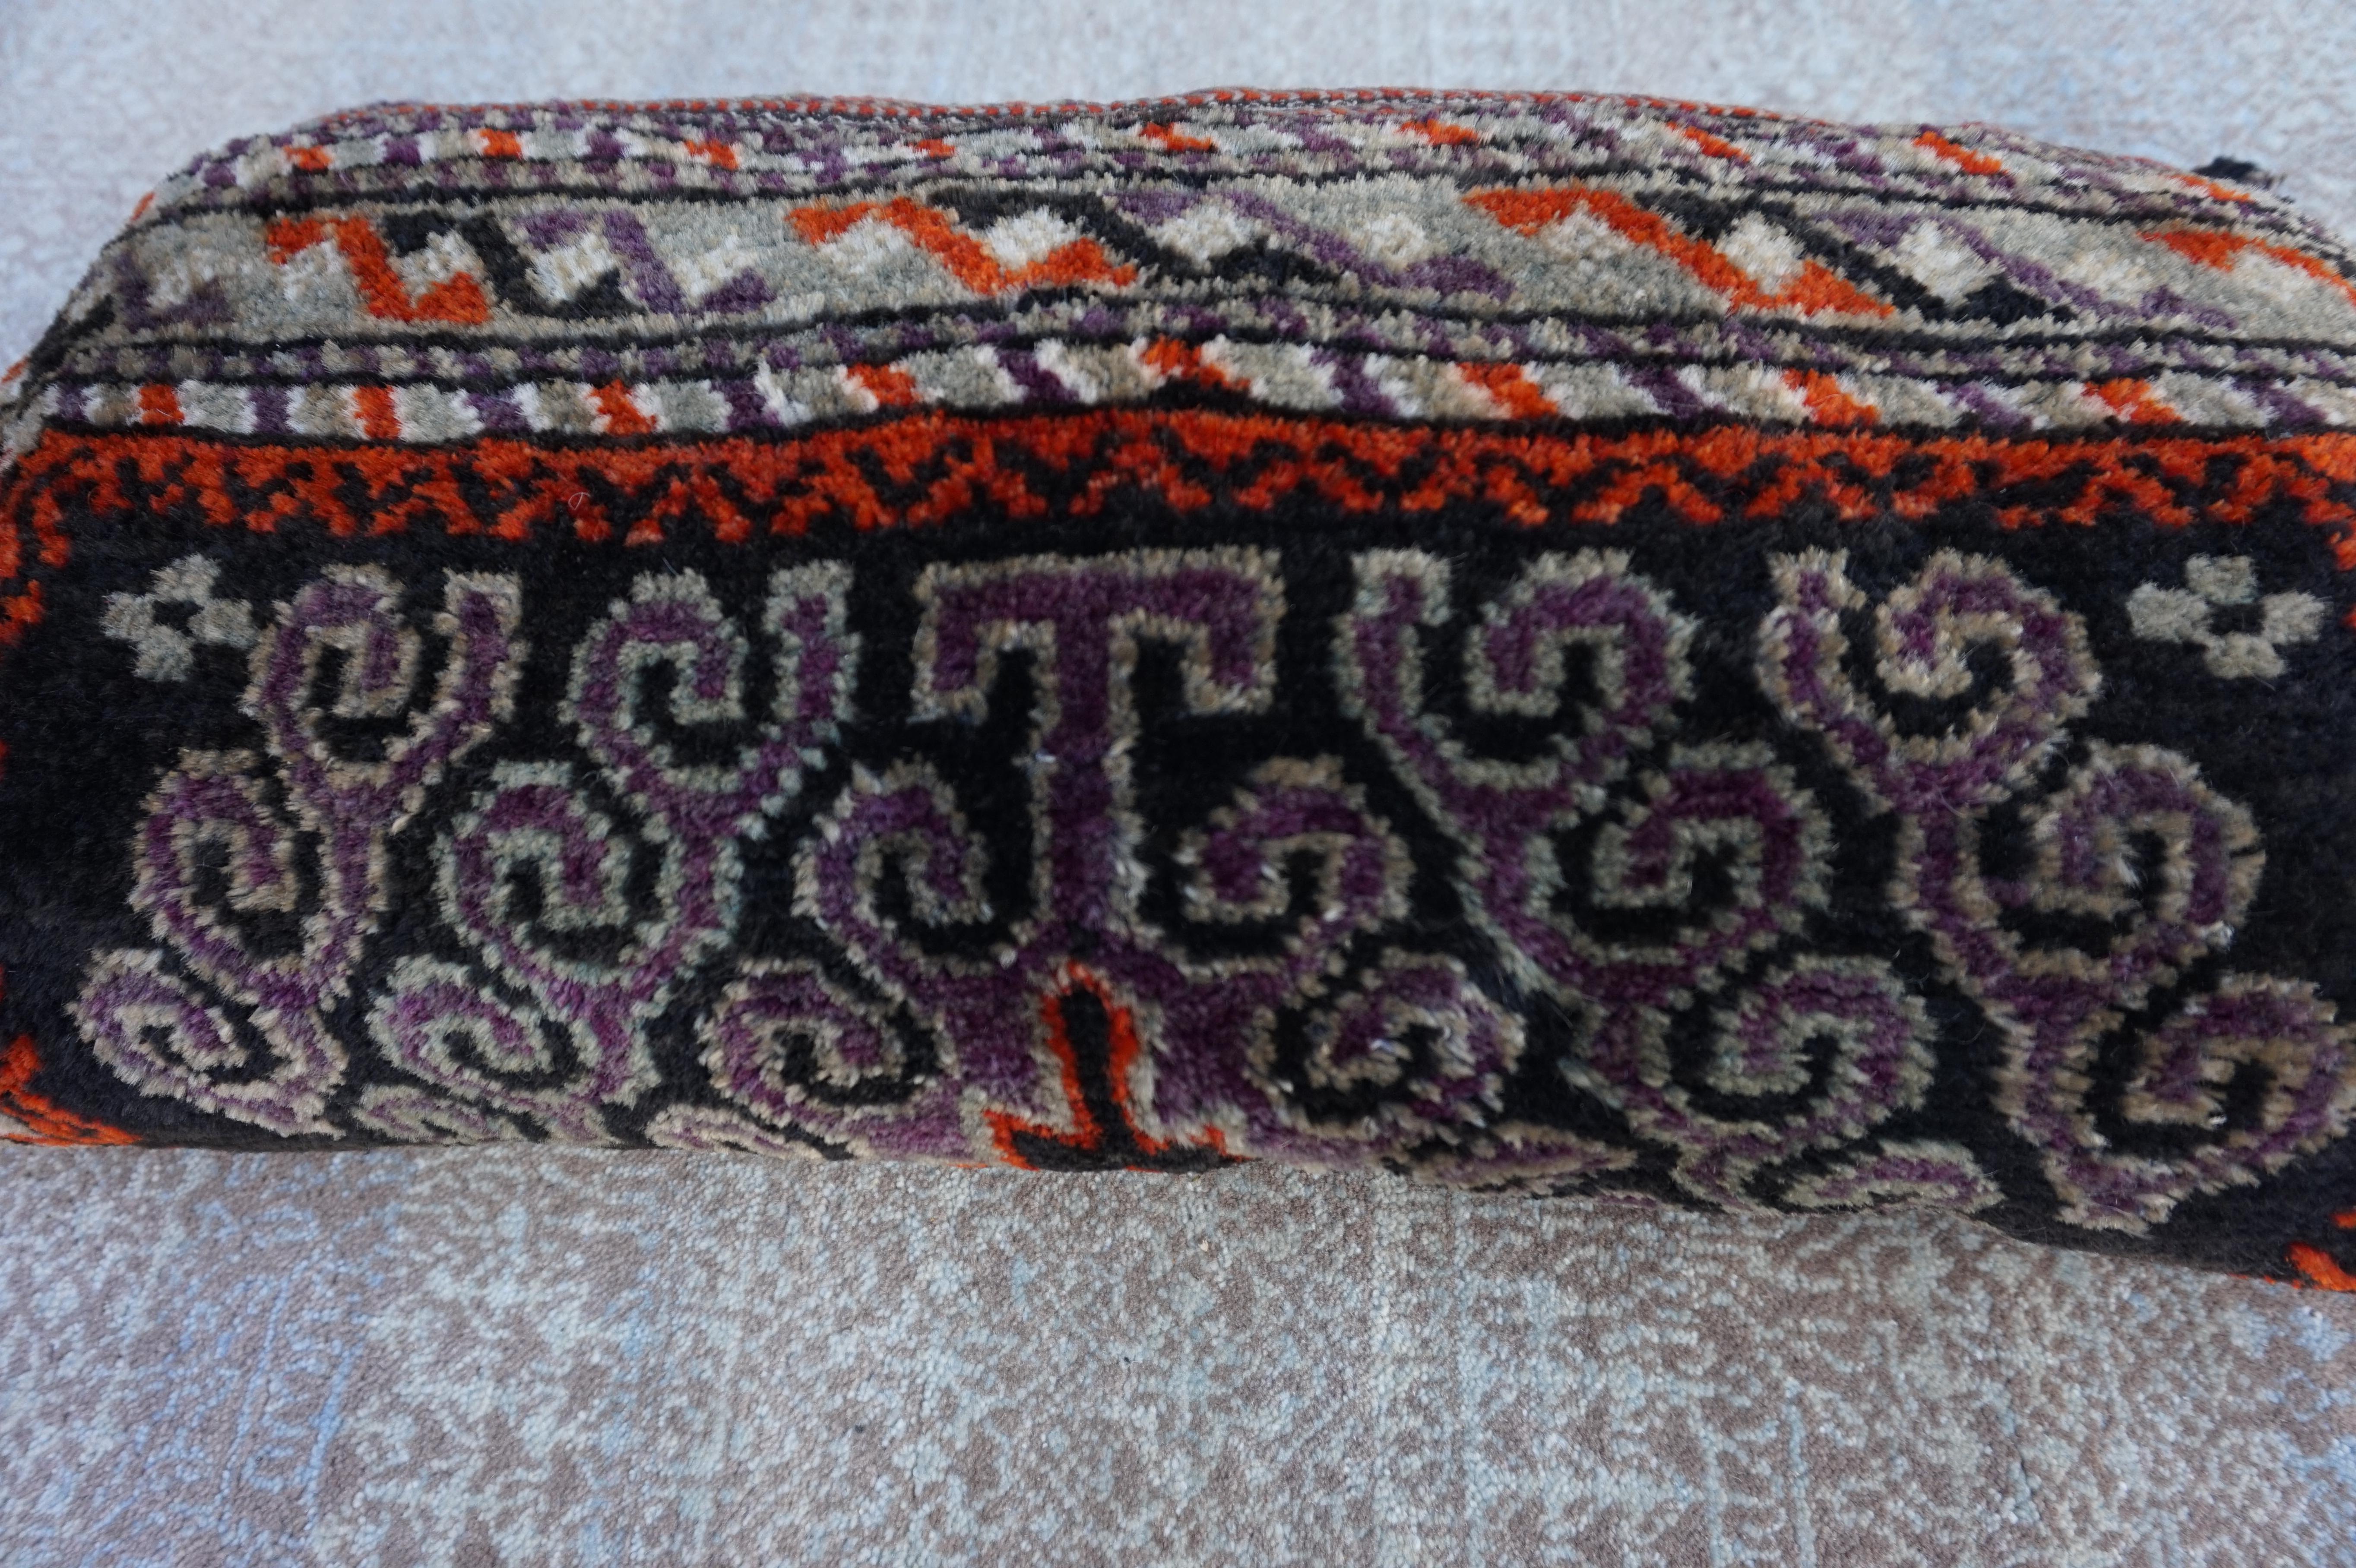 Rustic Hand-Knotted Wool Cushion Pillow with Geometric Tribal Patterns For Sale 1